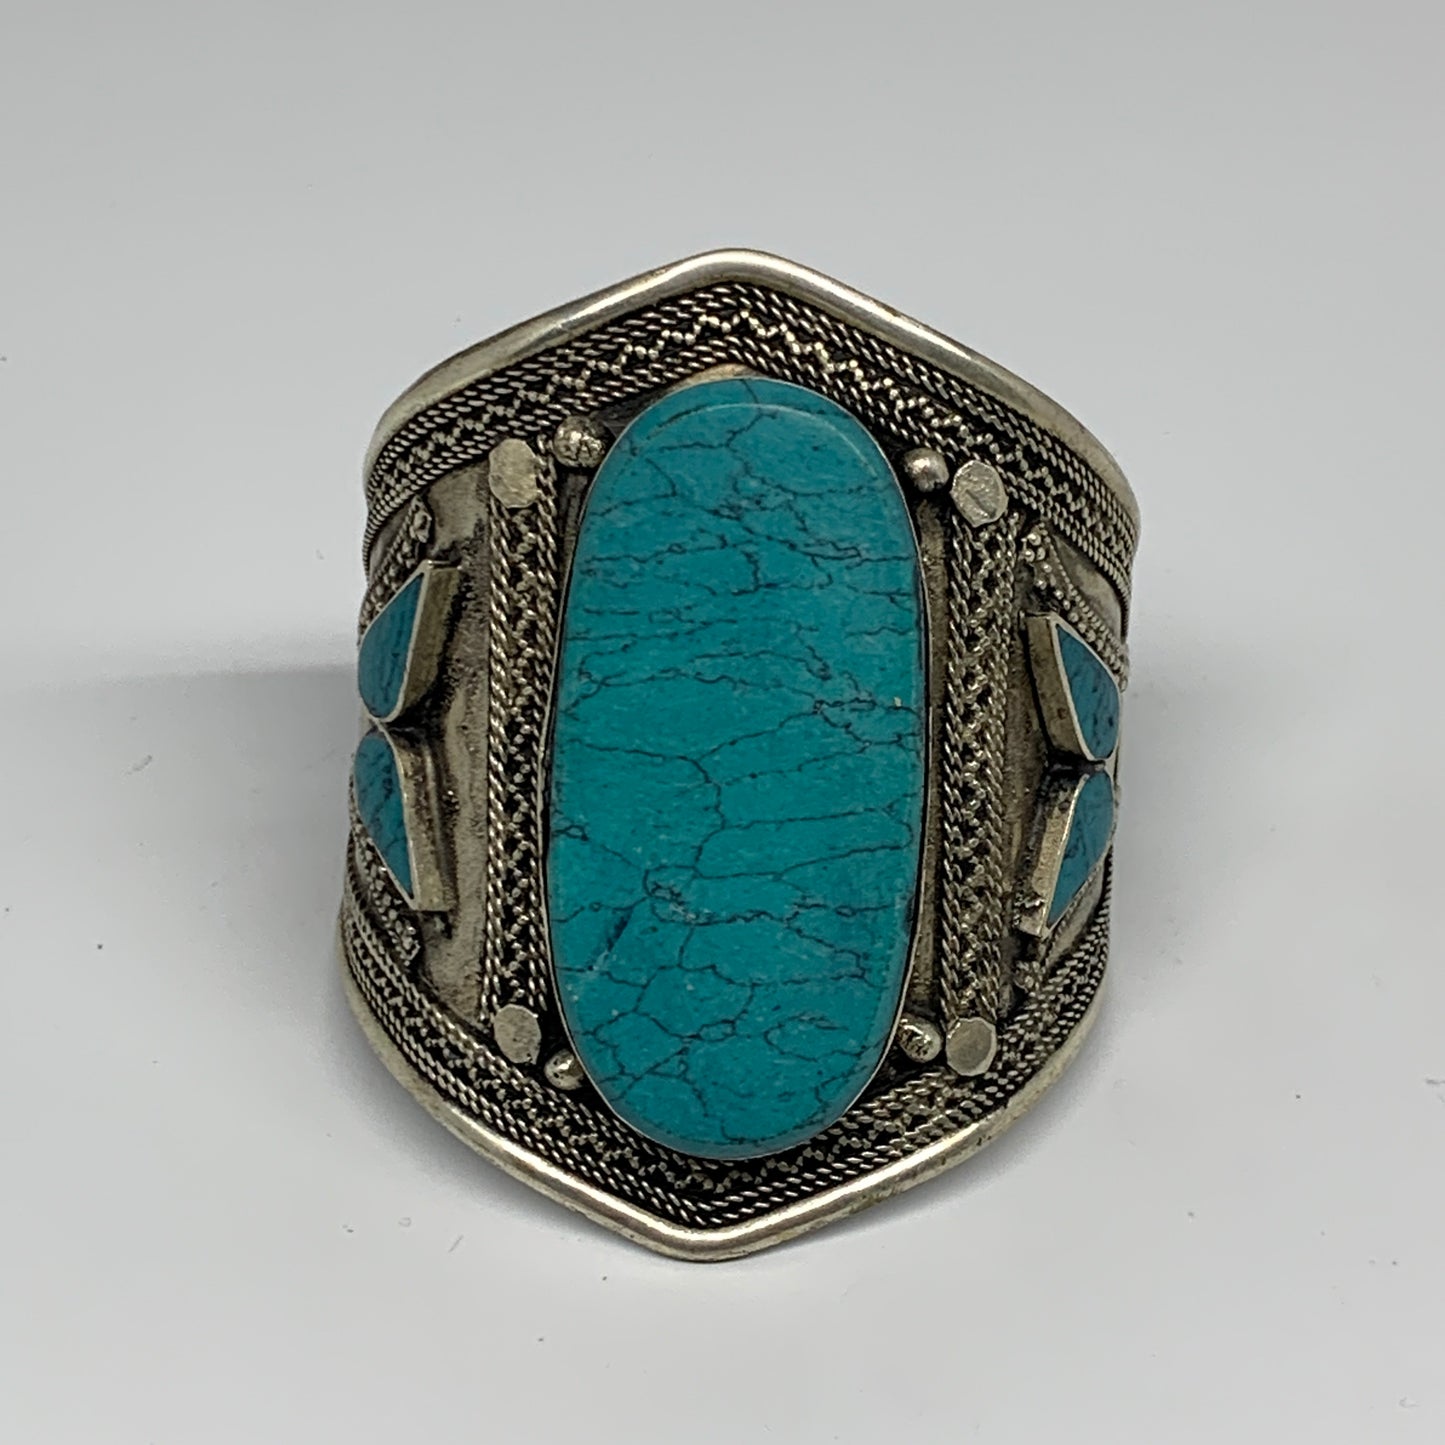 59.7g, 3.2" Vintage Reproduced Afghan Turkmen Synthetic Turquoise Cuff Bracelet,